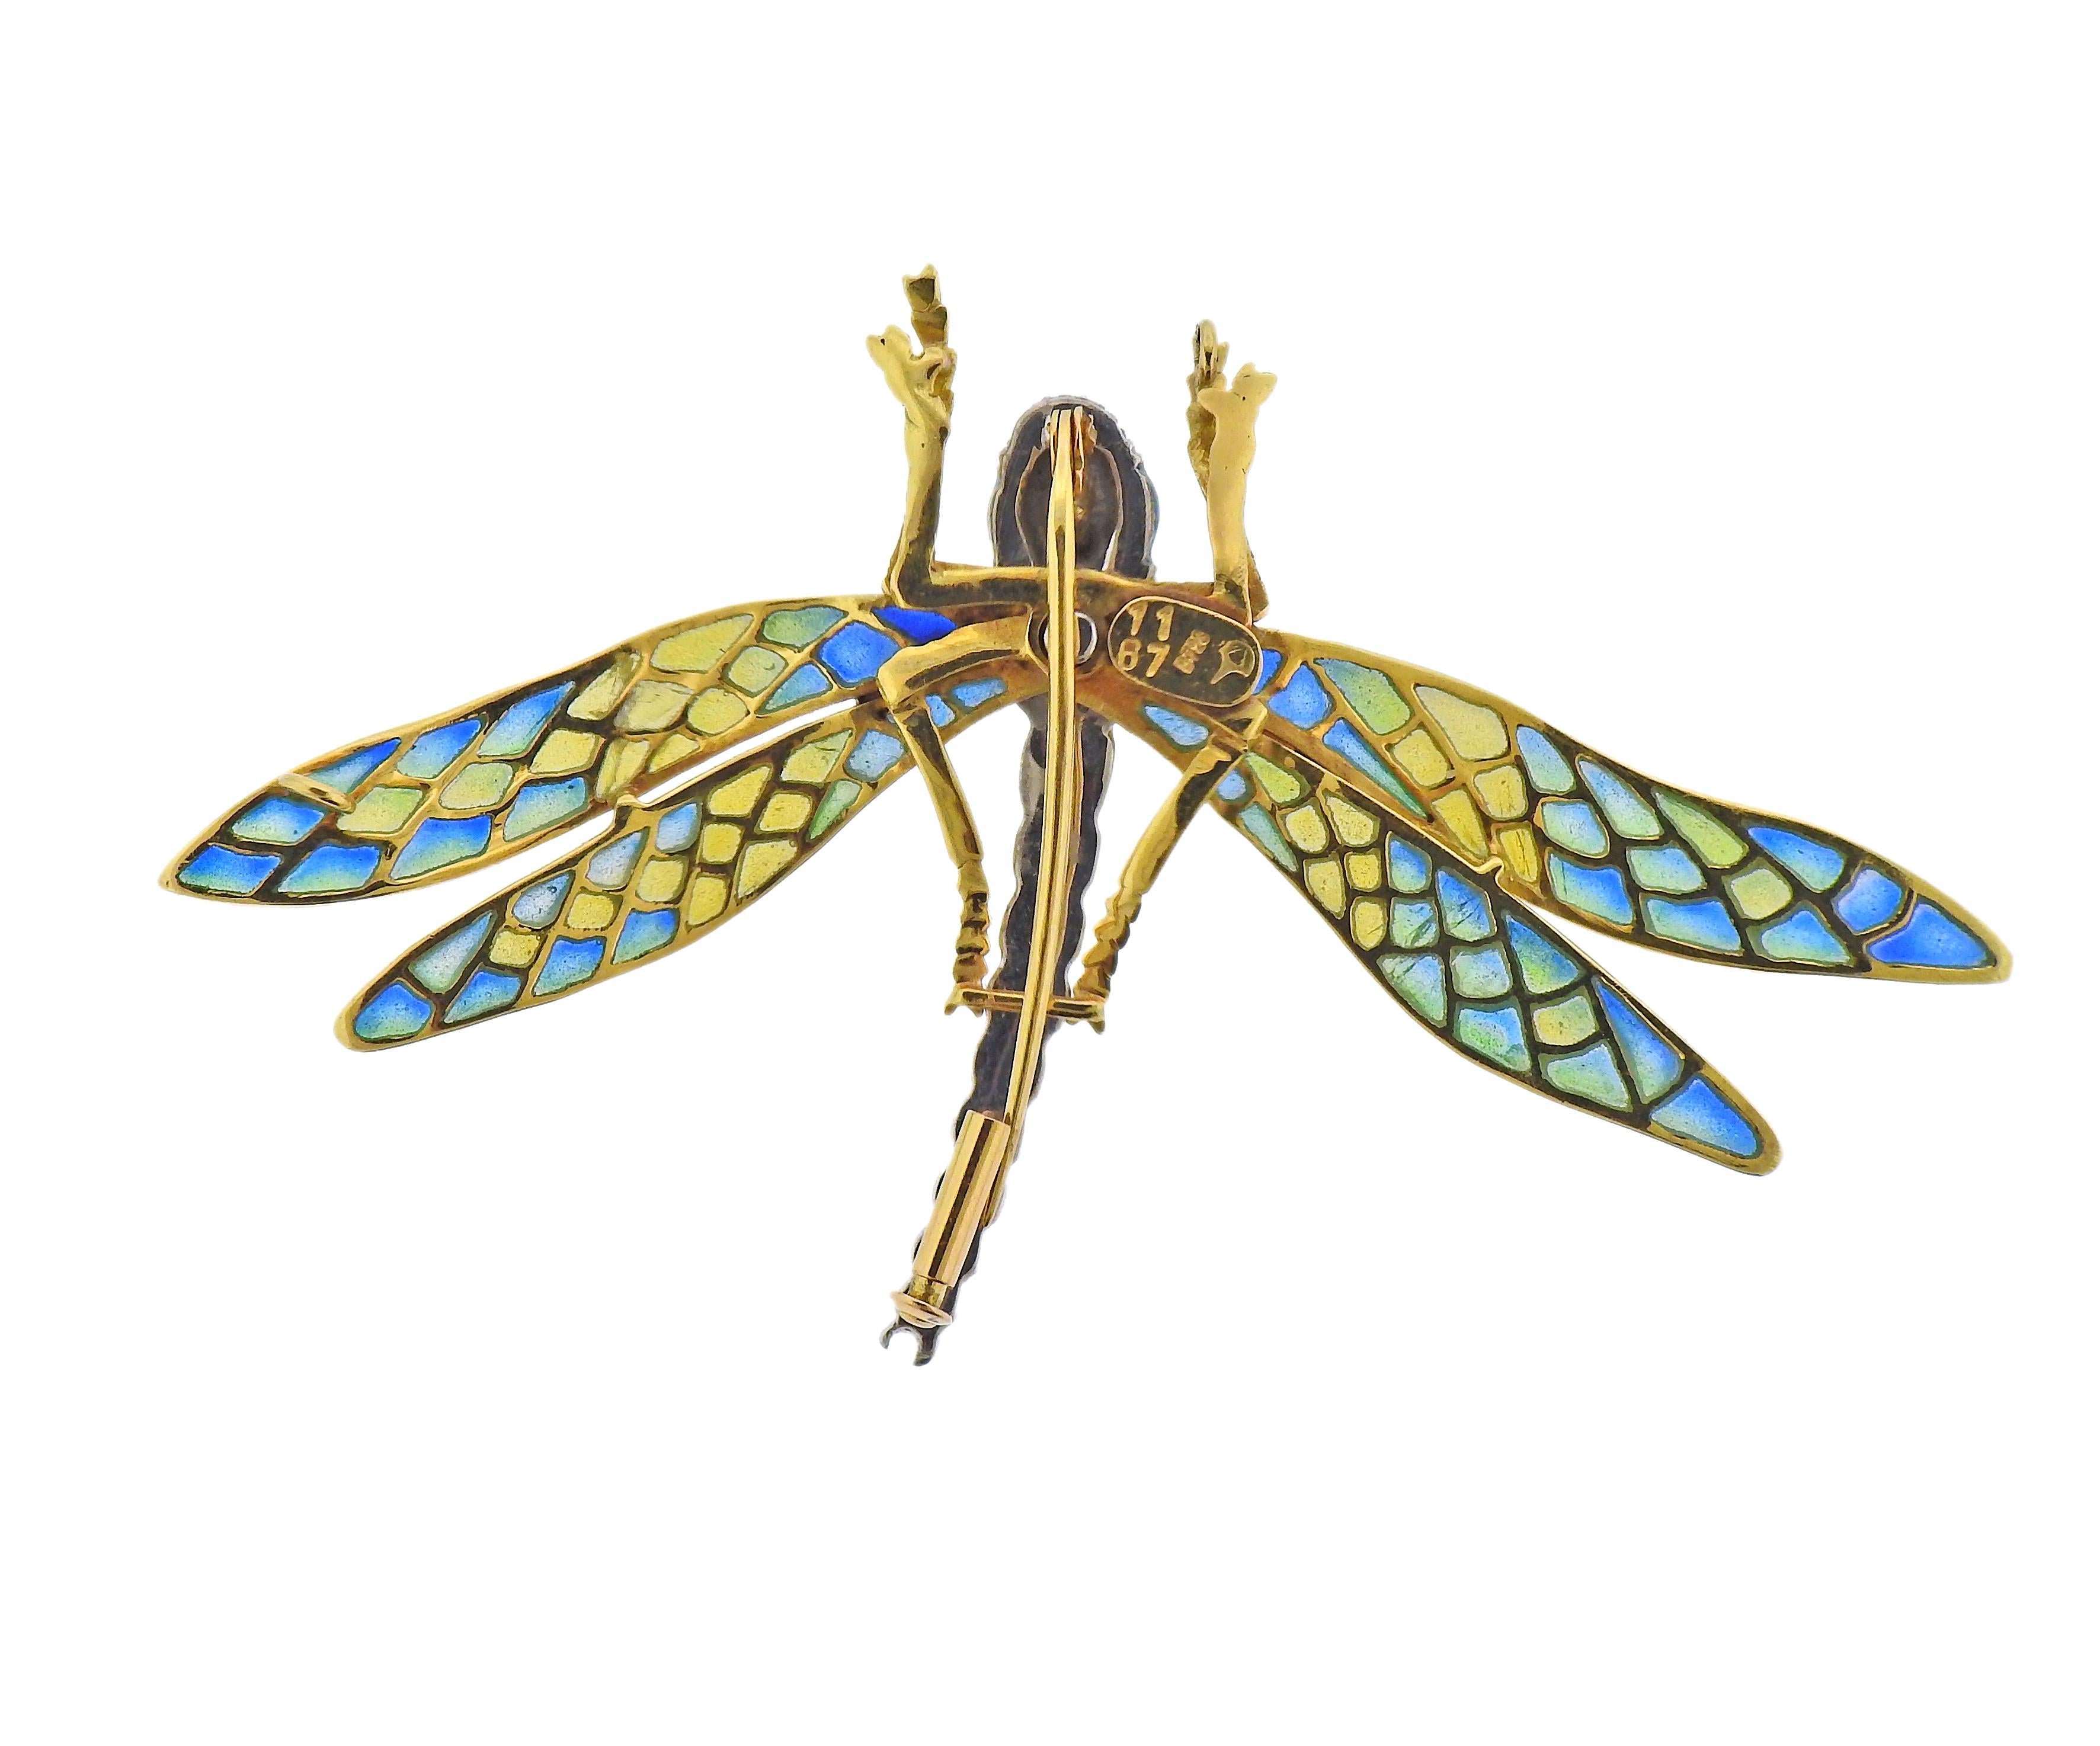 18k gold plique-a-jour and diamond dragonfly brooch. Measuring 45mm x 73mm. Marked: Hallmark, 0.75, 1167. Weight - 12.1 grams. 